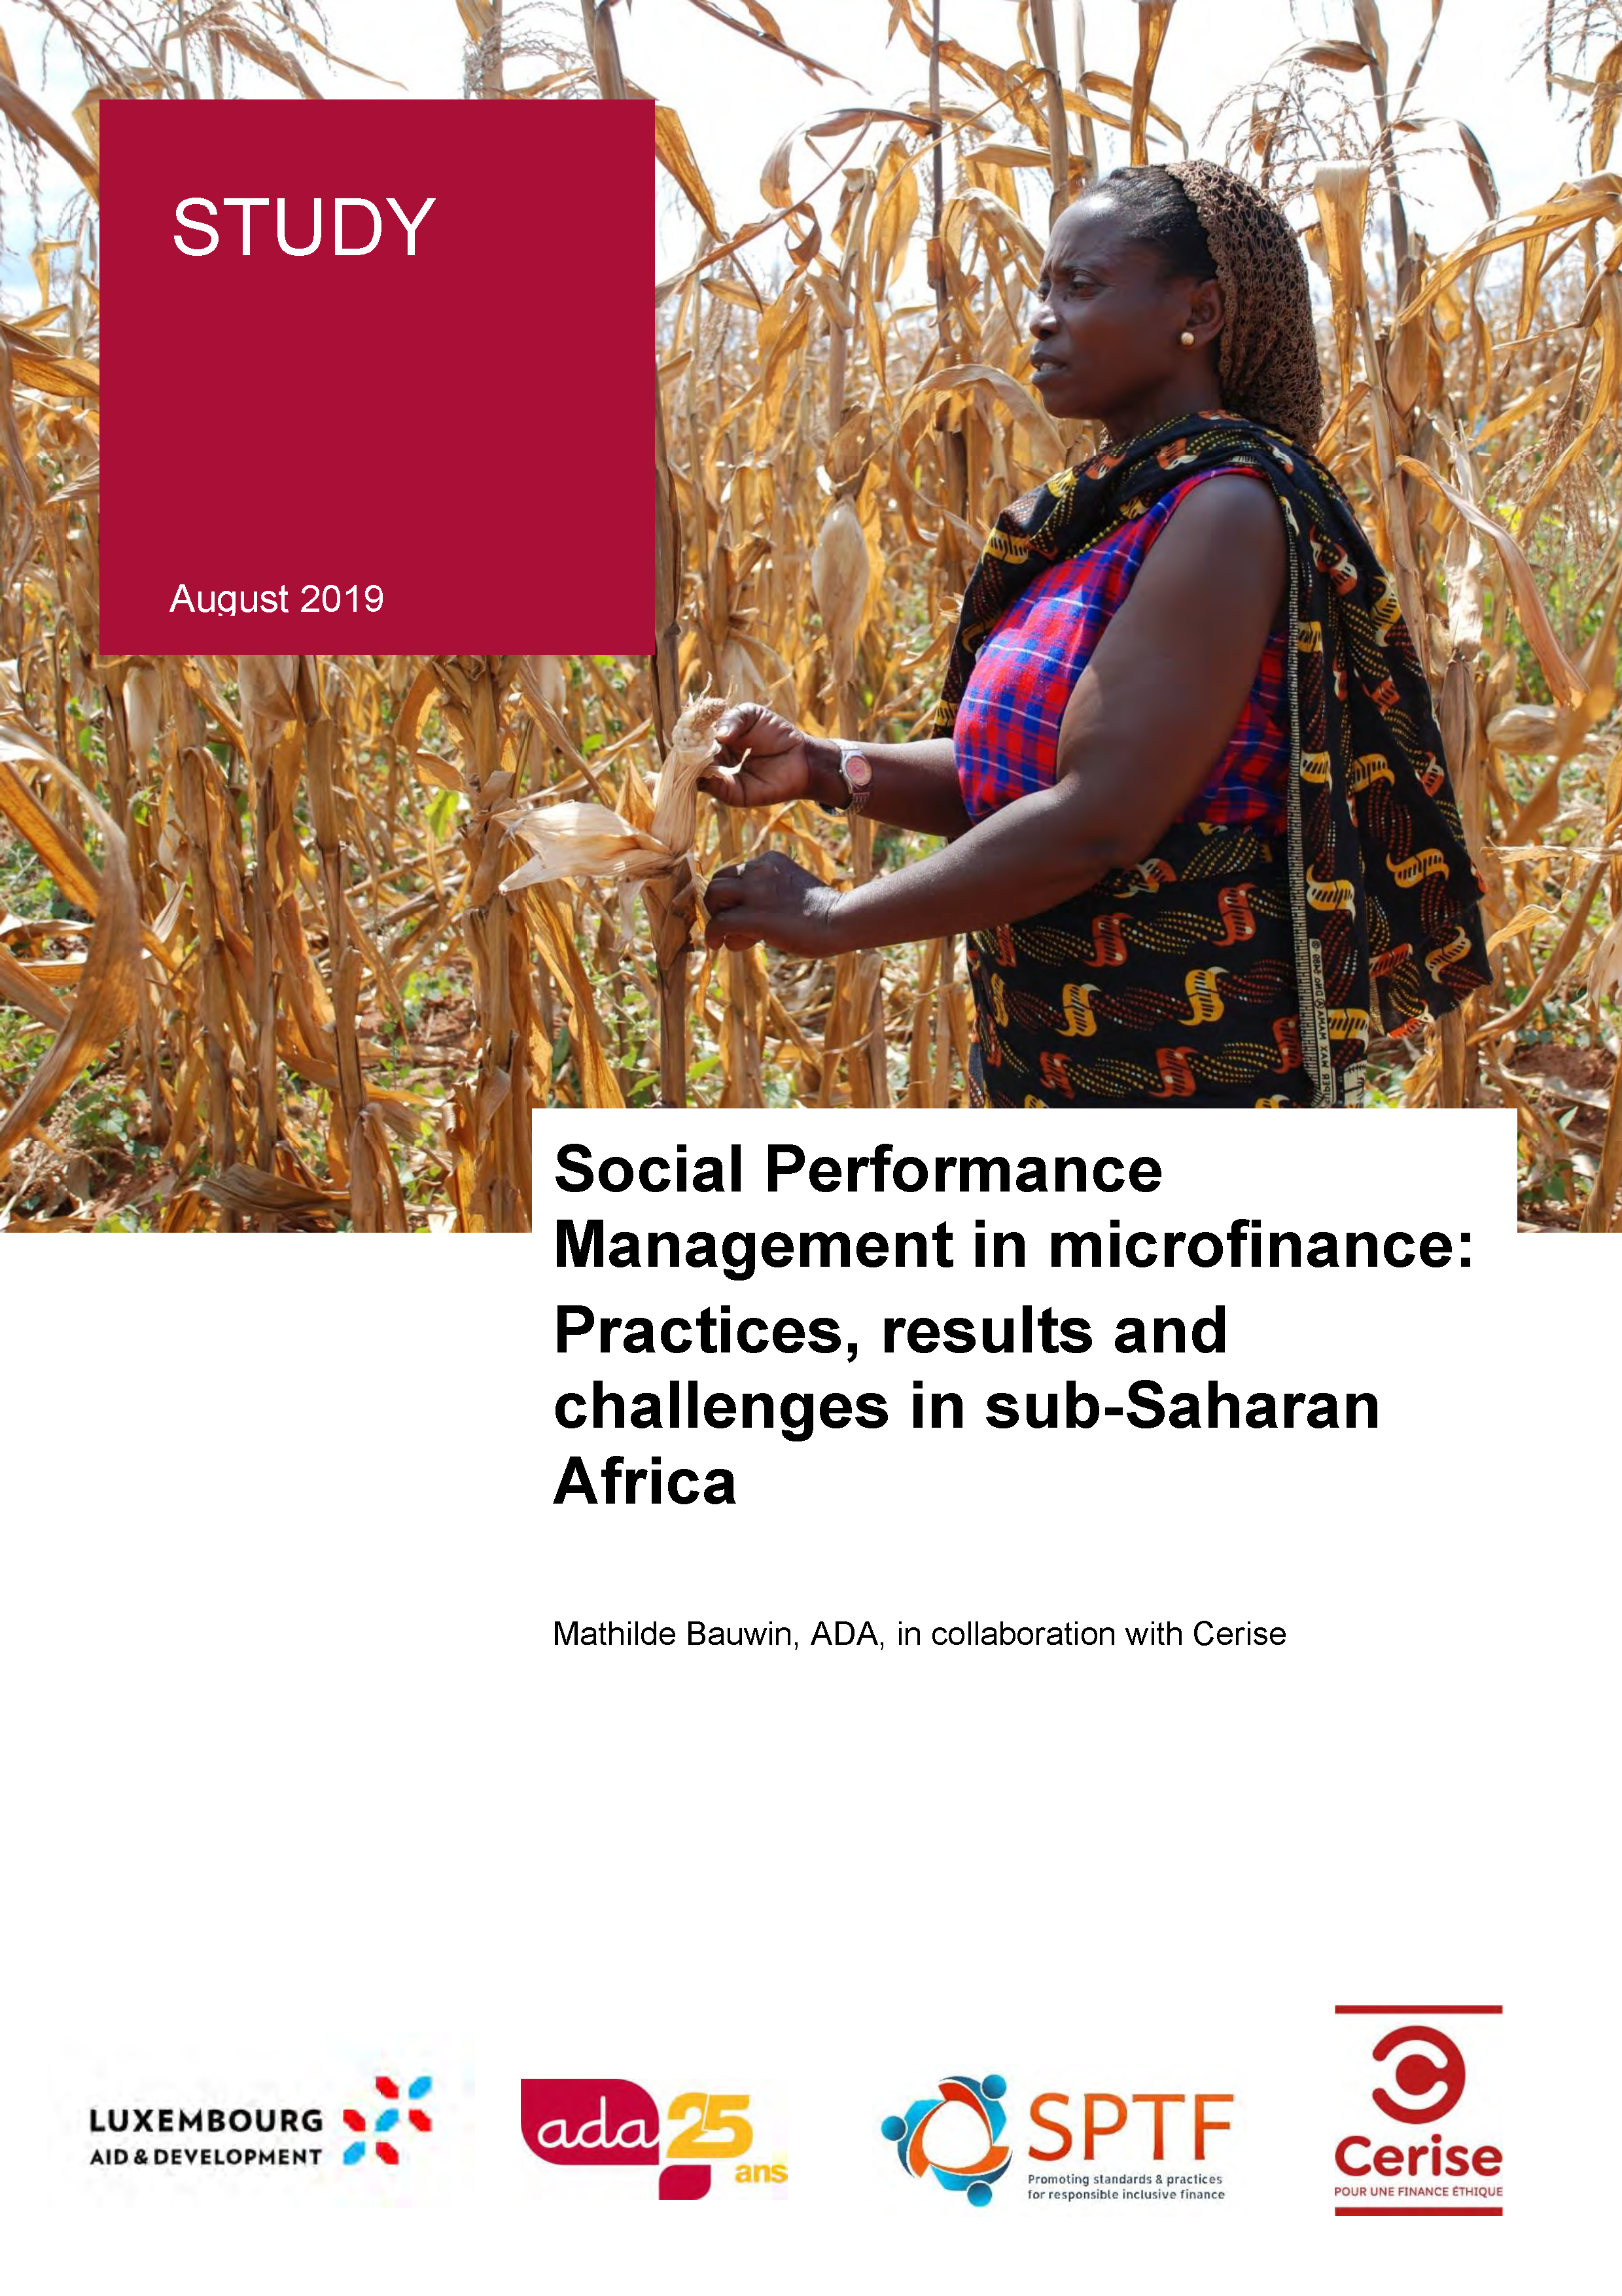 Social Performance Management in microfinance